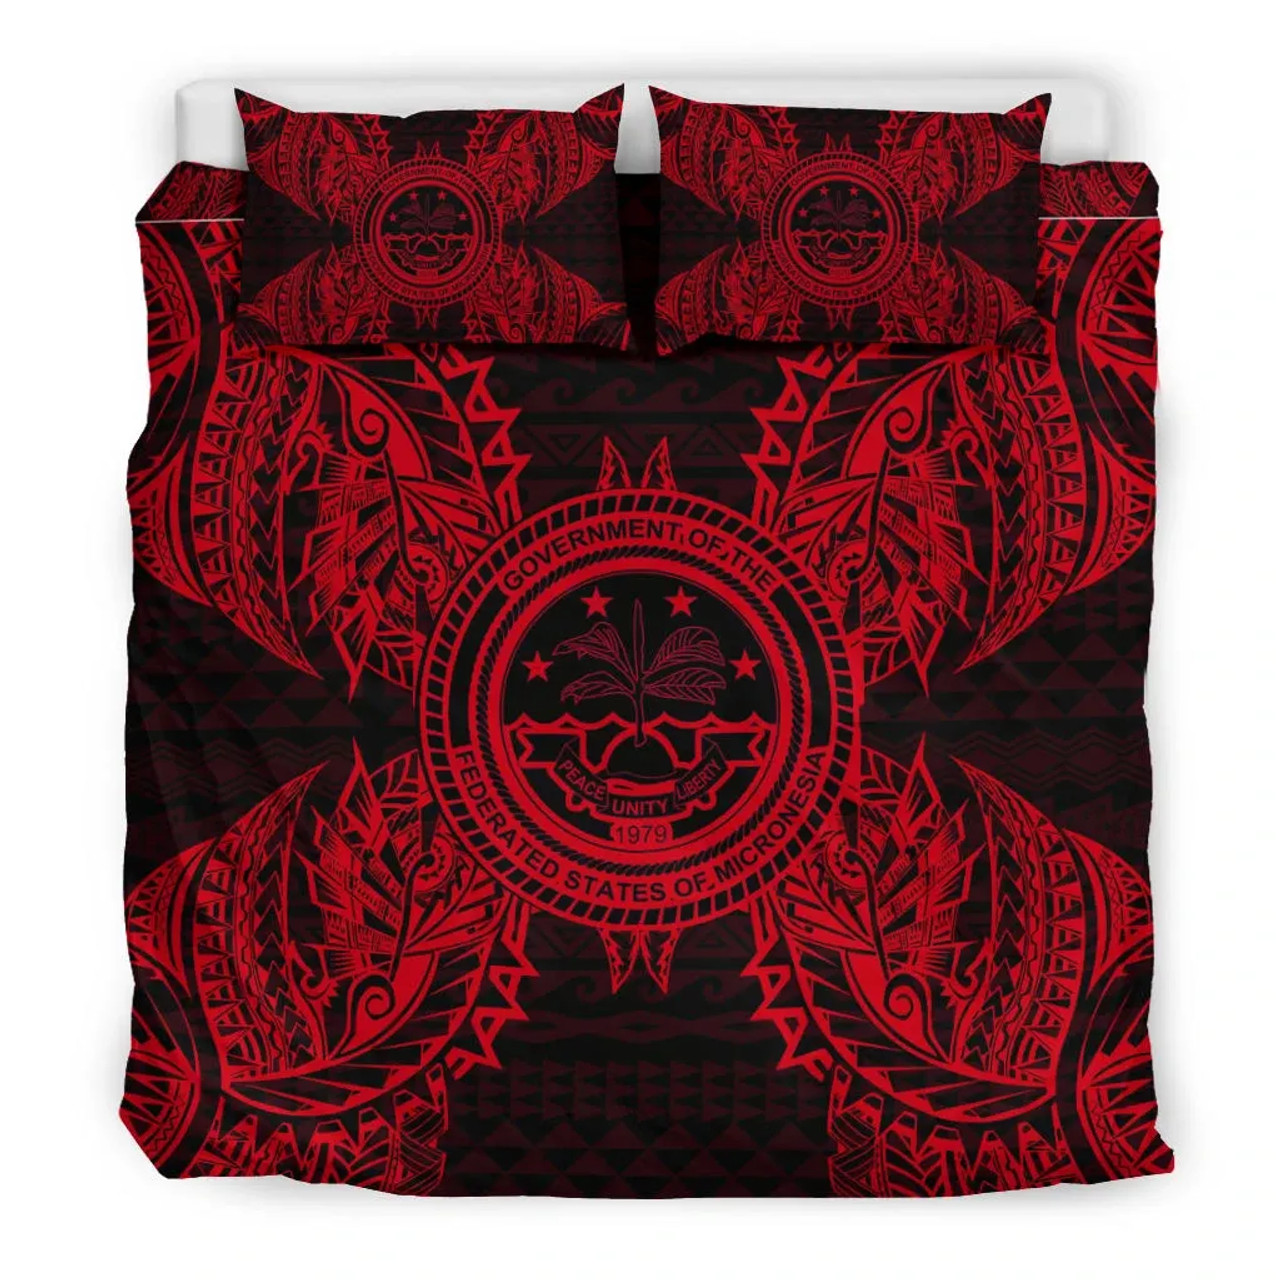 Polynesian Bedding Set - Federated States Of Micronesian Duvet Cover Set Map Red 3